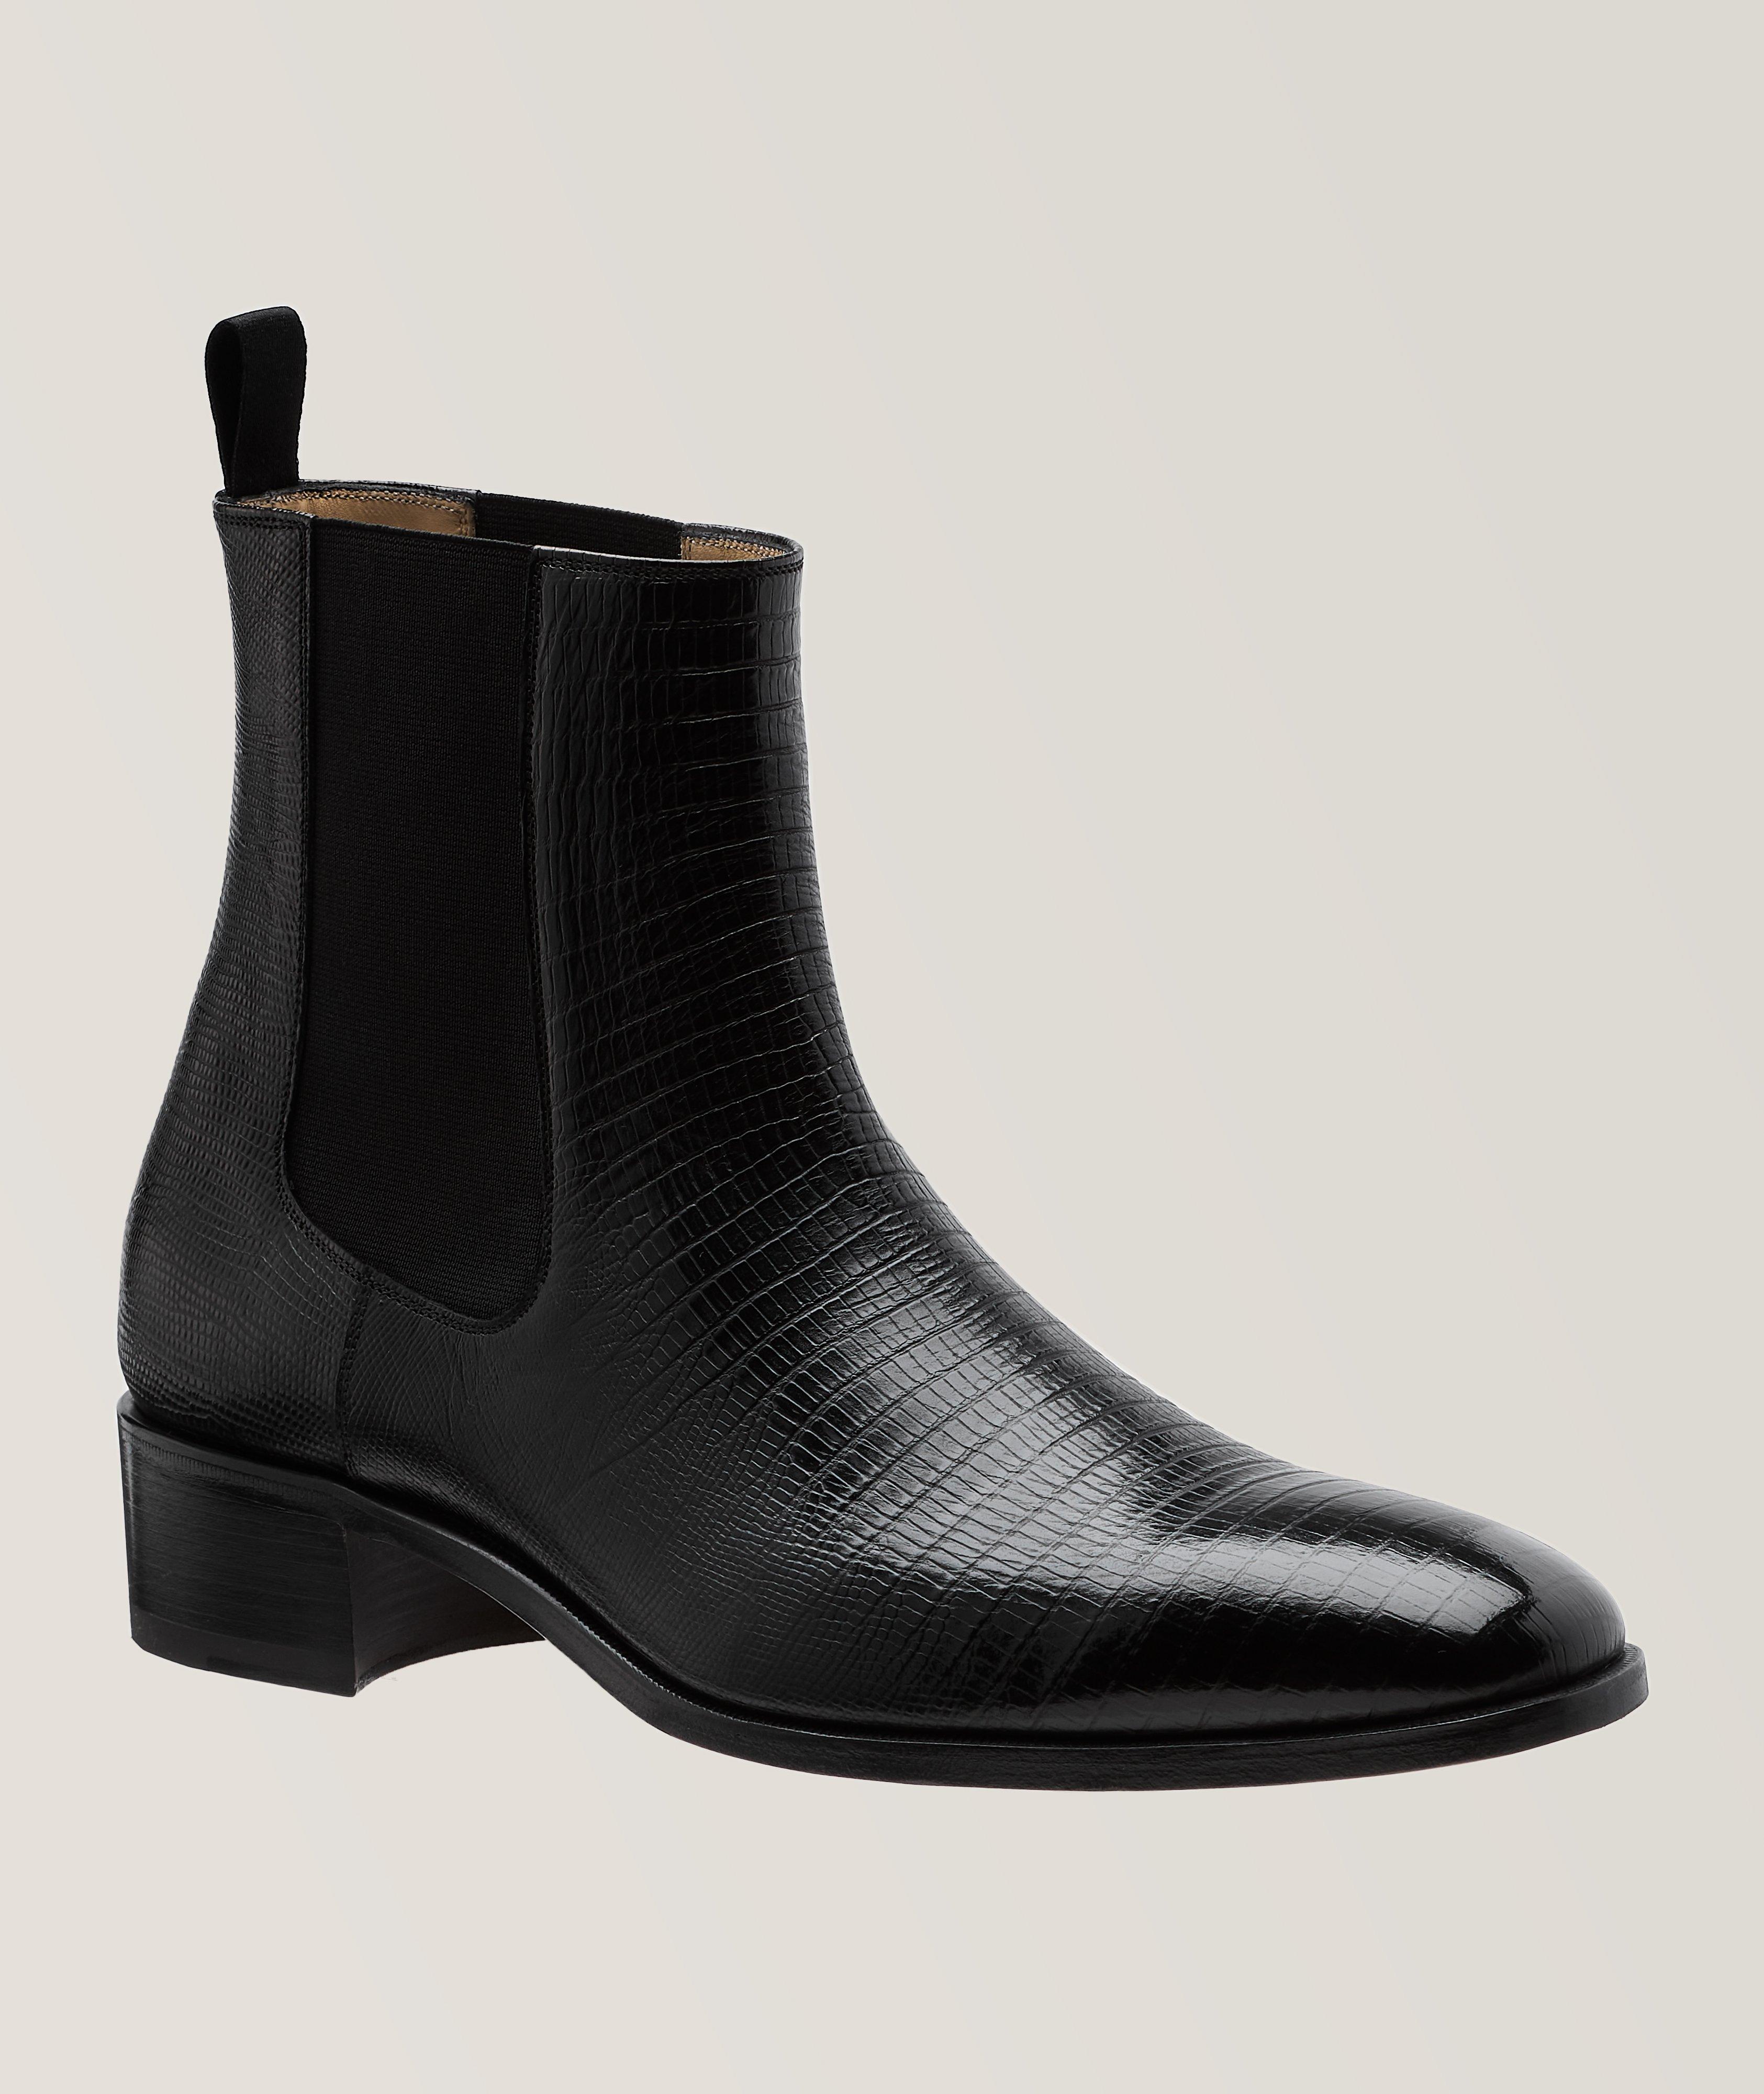 TOM FORD Alec Textured Leather Cuban Heel Chelsea Boots